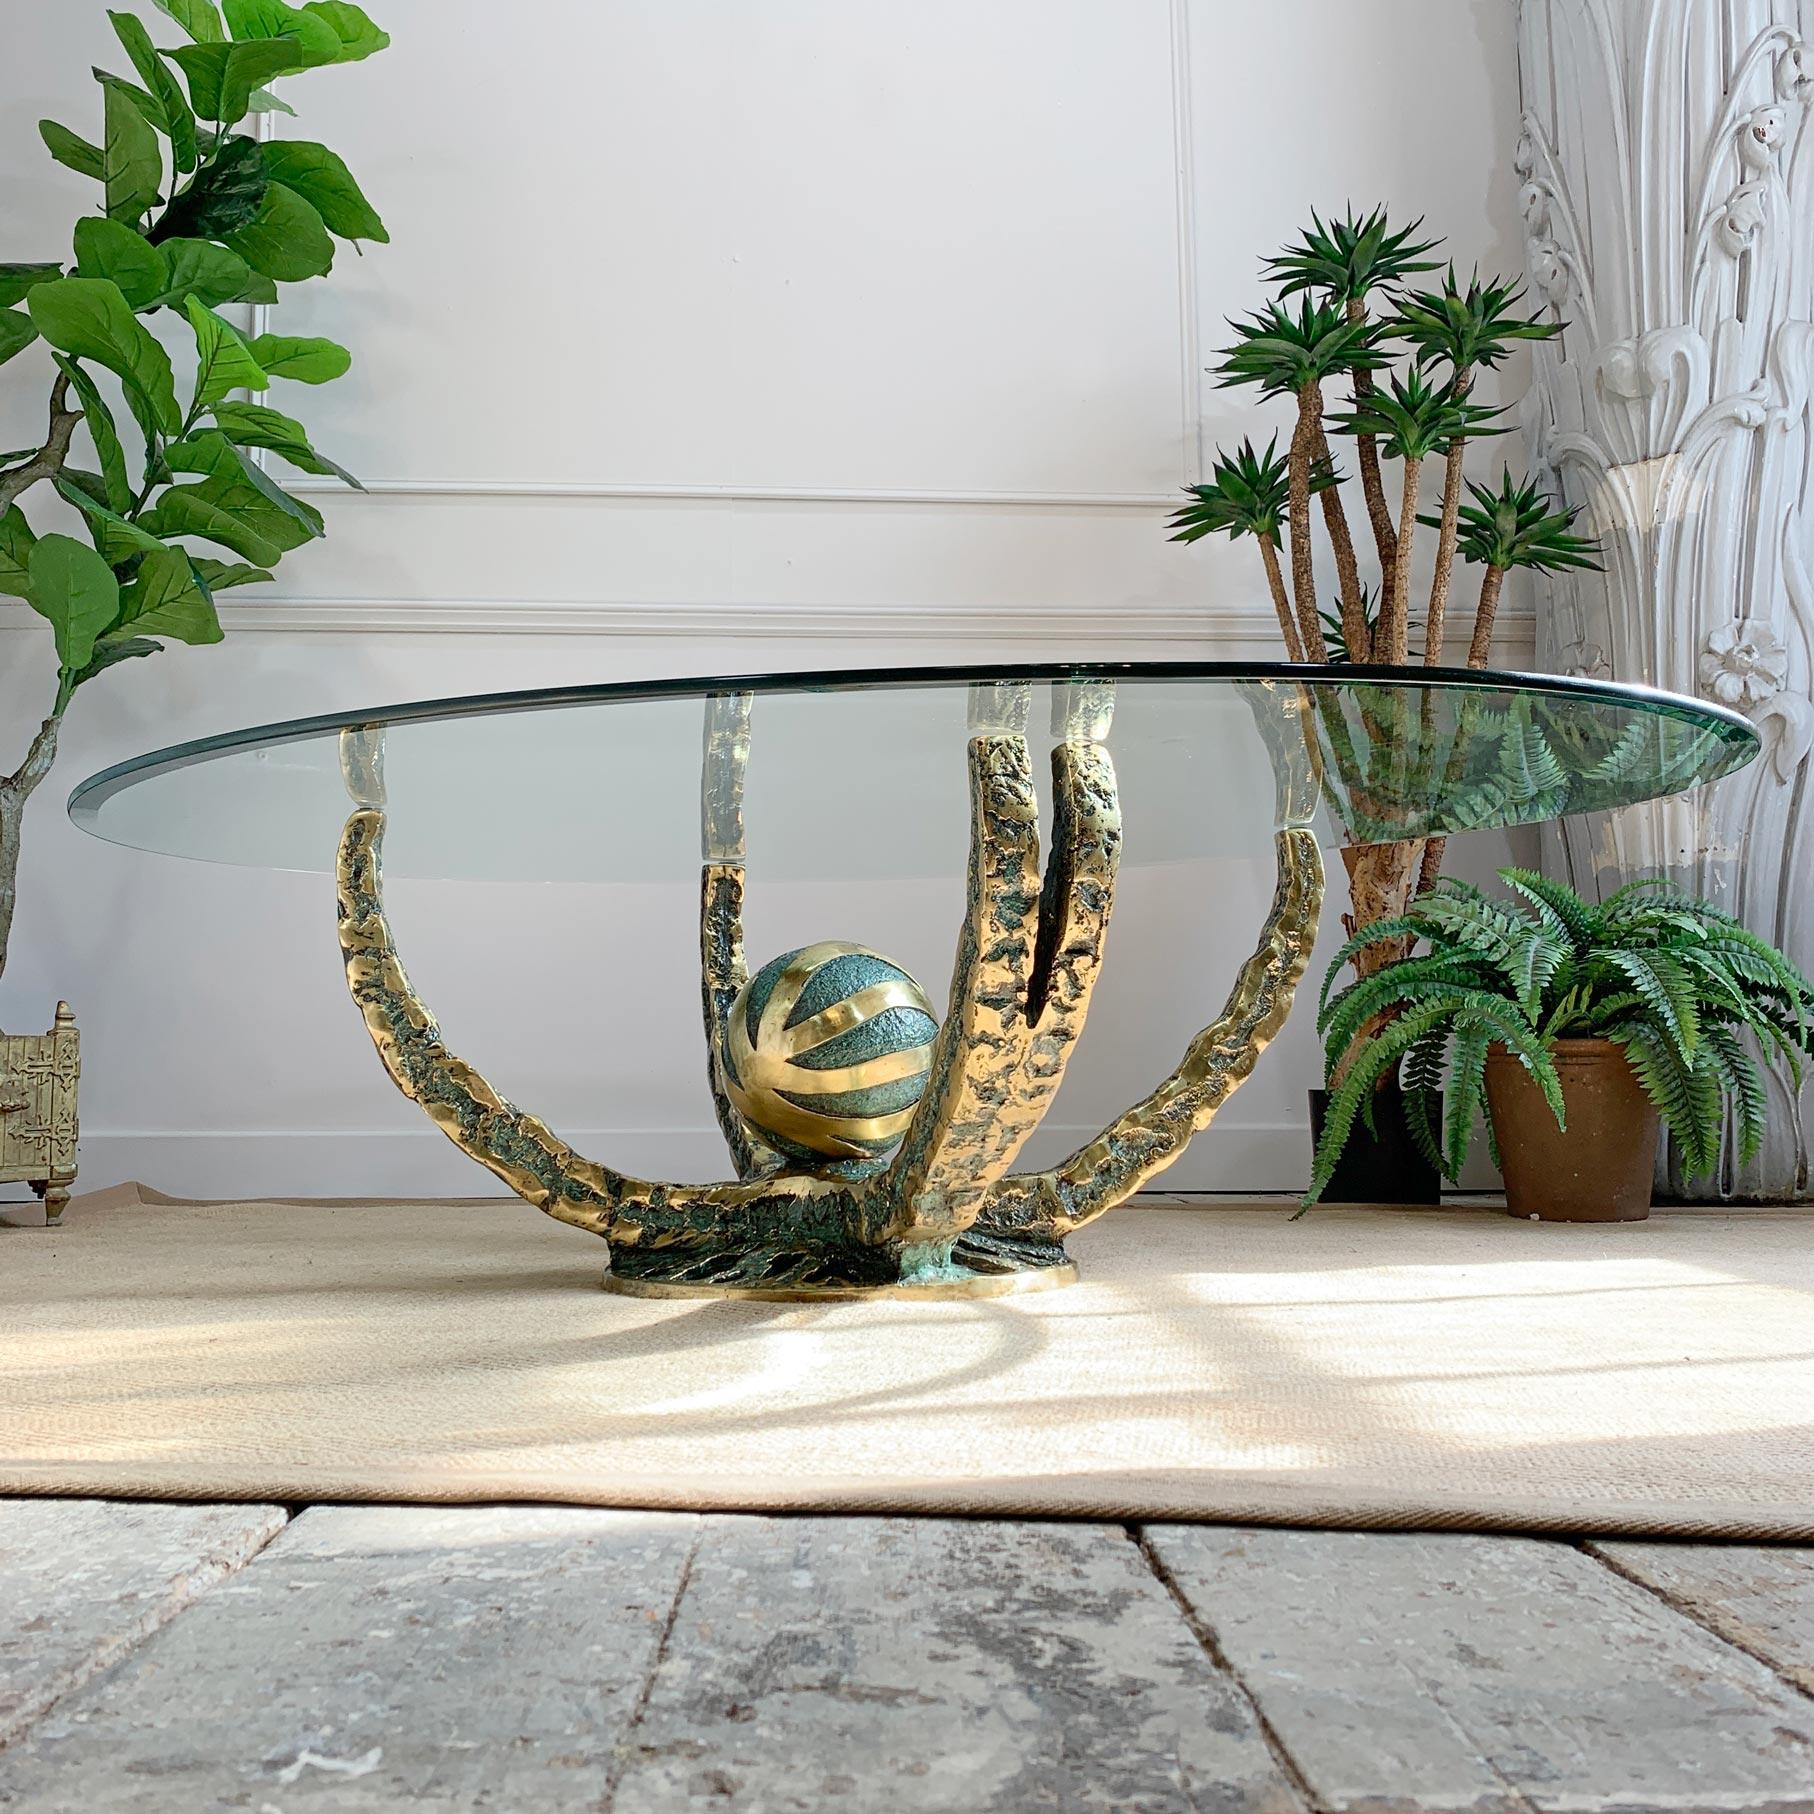 Henri Fernandez Brutalist Bronze ‘Octo’ centre or coffee table. This stunning hand crafted table in gilt and raw bronze dates to the early 1970’s and is with it’s original large oval glass top with beveled edge. Crafted to represent an